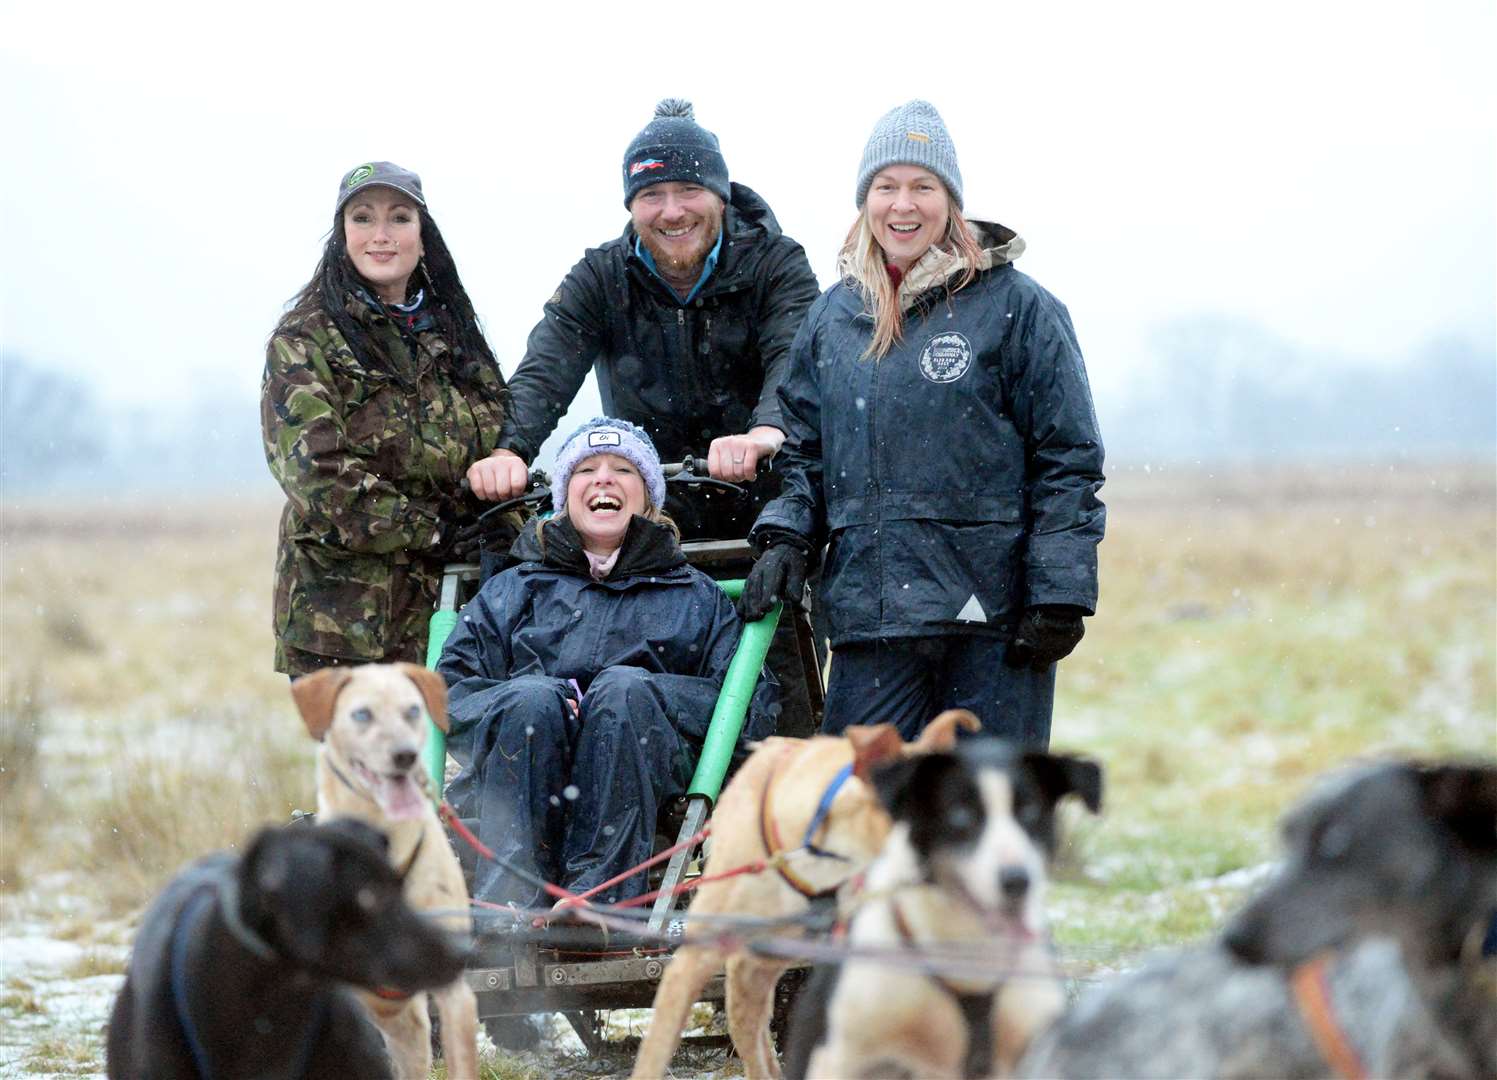 Amanda and Tobias Leask from Leask Racing Sled Dog Adventures kindly donated the fee for the session to the fundraiser. Pictures: James Mackenzie